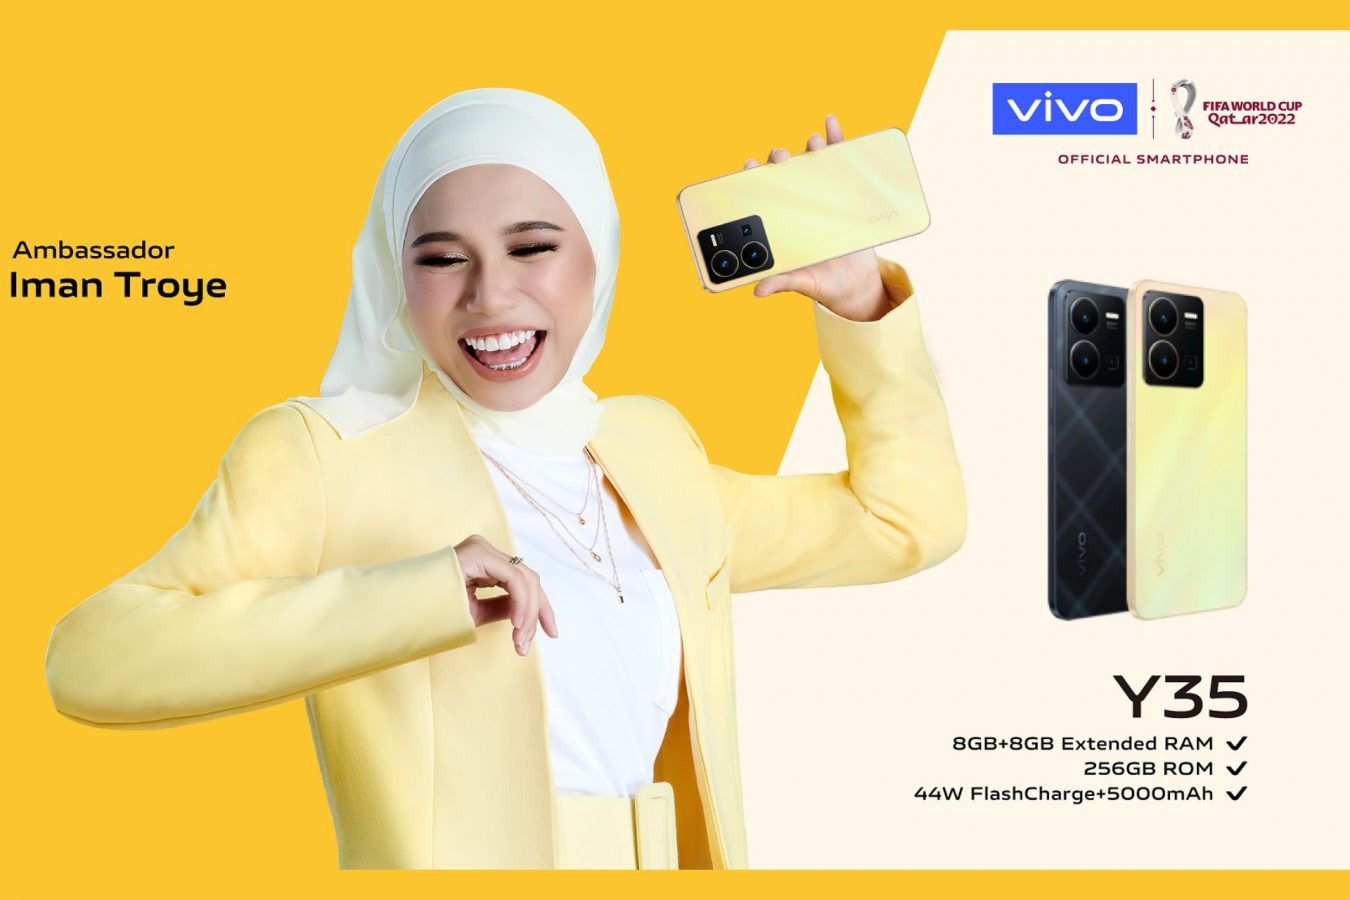 The new ‘youthful, fun-packed’ vivo Y35 features brand ambassador Iman Troye